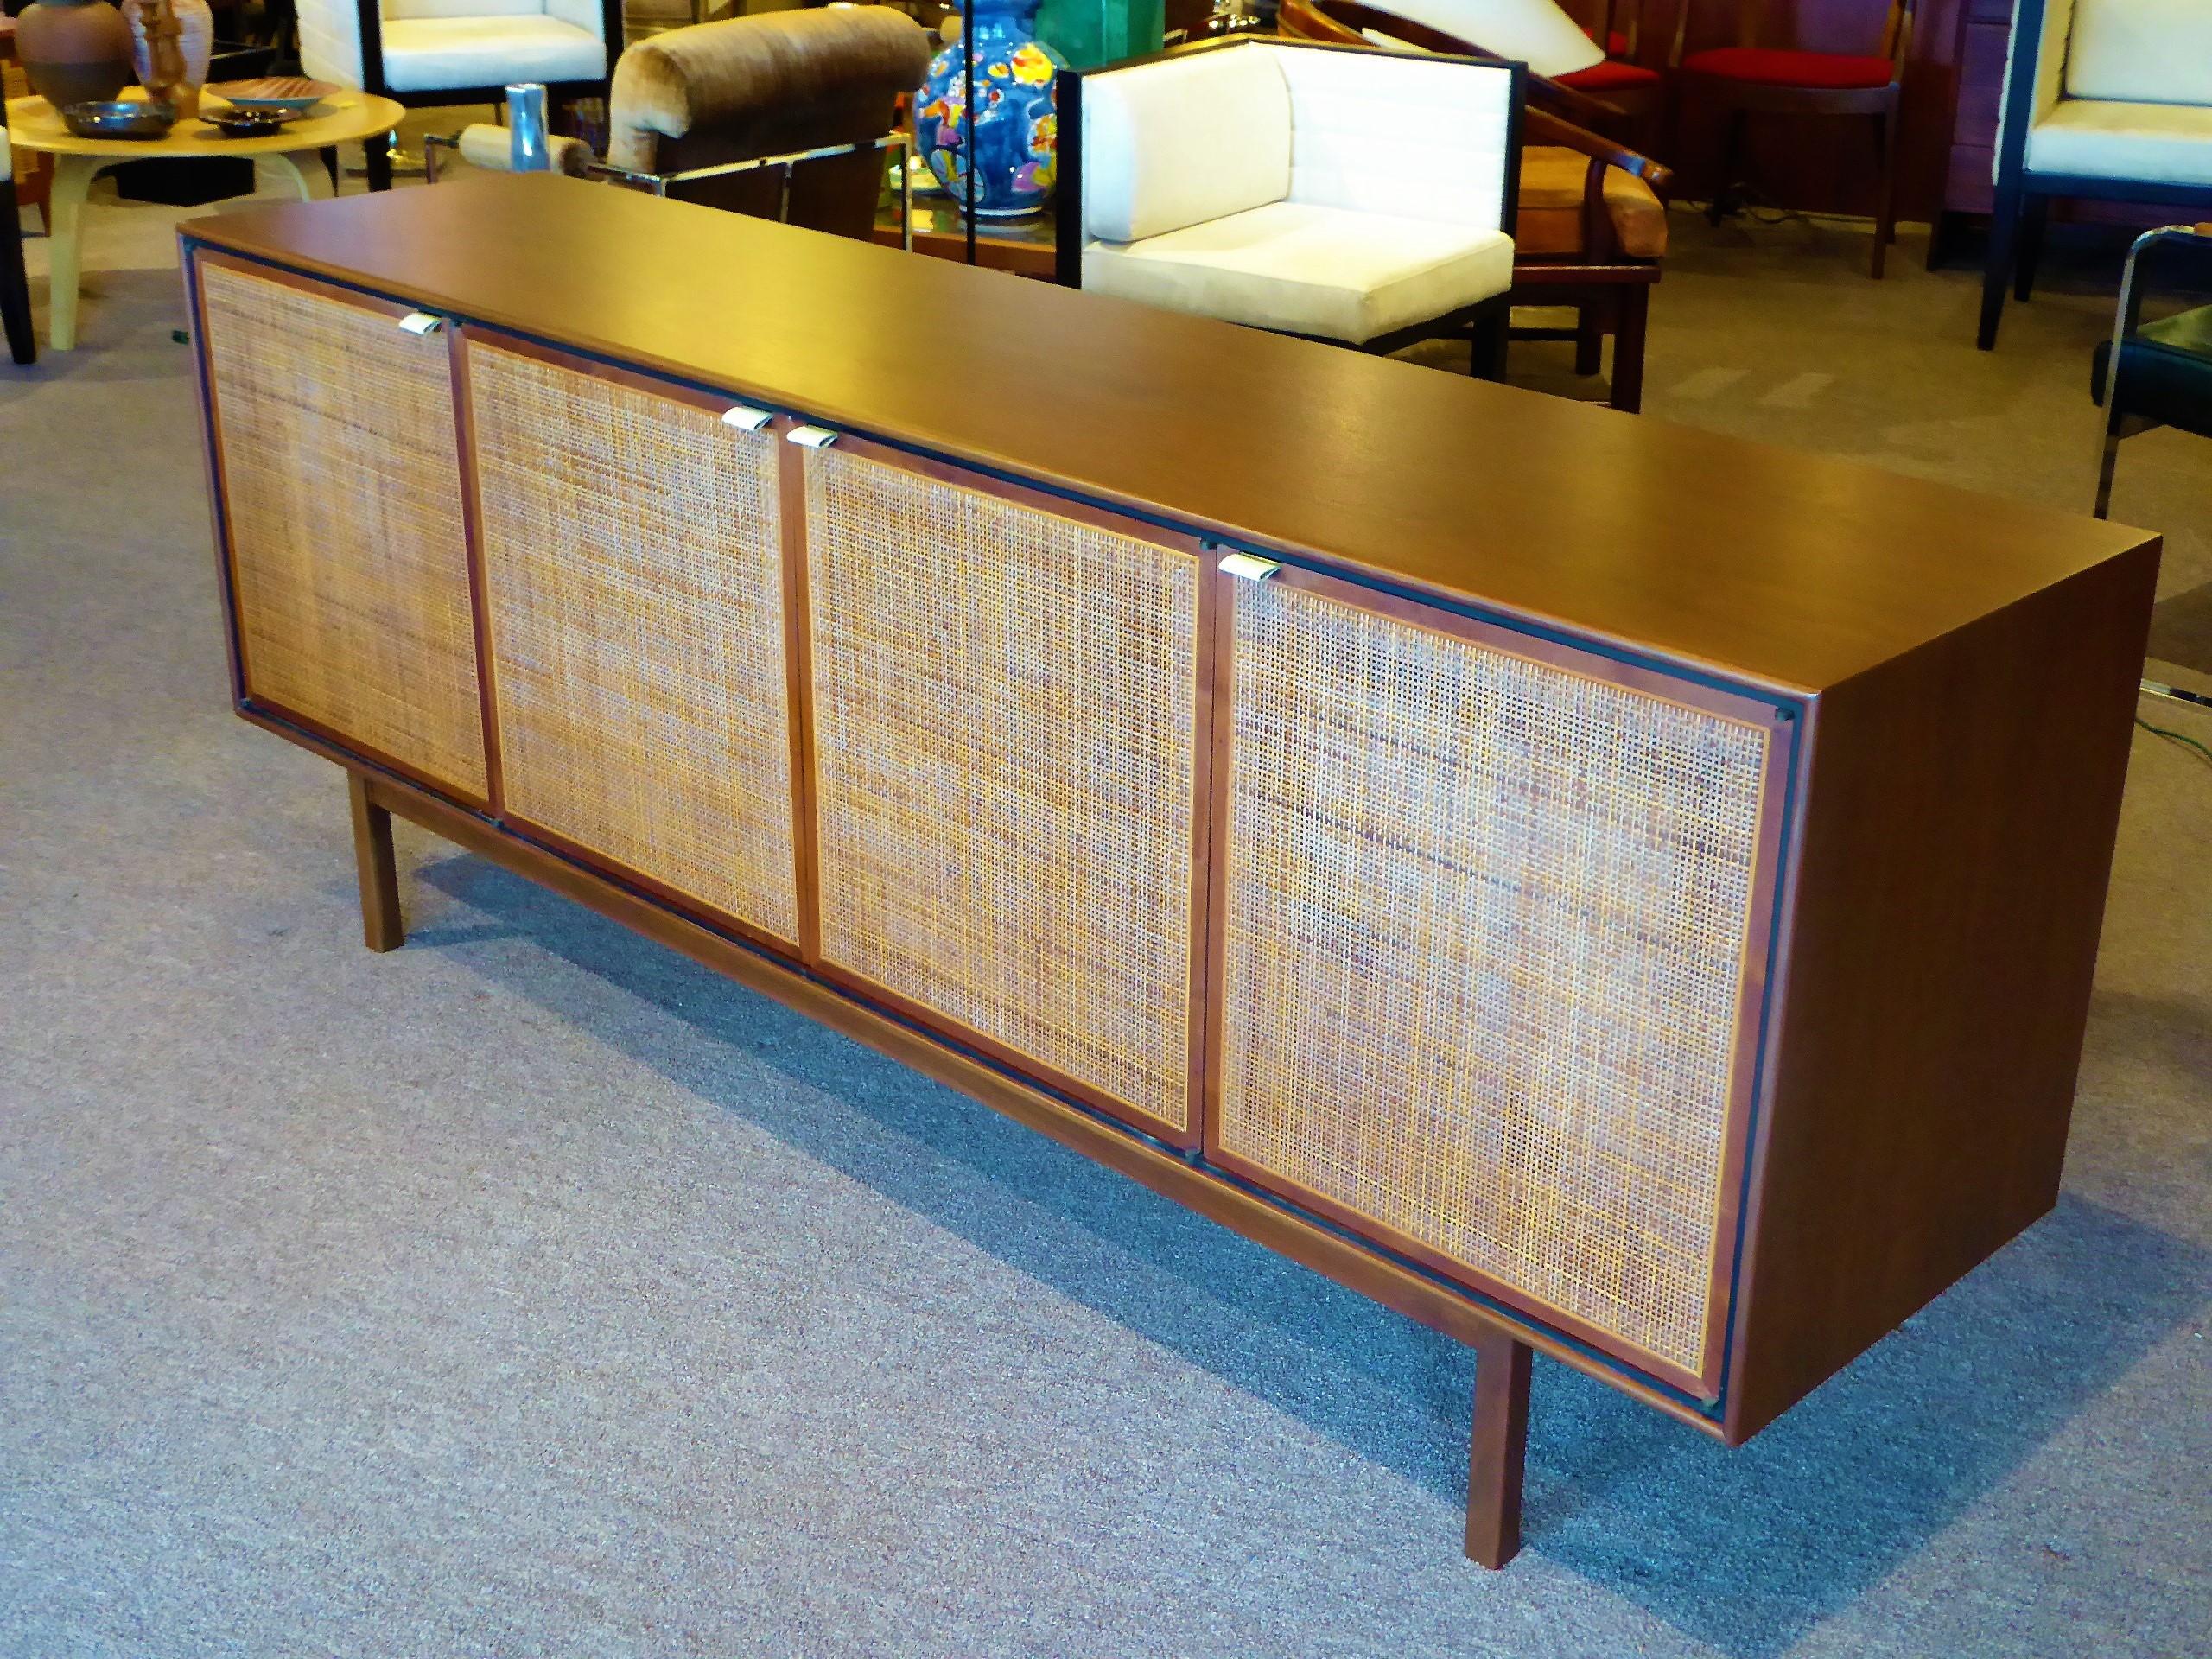 A beautifully designed and constructed credenza by Founders Furniture, probably a Jack Cartwright design, it features a figured walnut case body with cane front doors and leather tab pulls supported by a rectilinear base. Doors conceal two